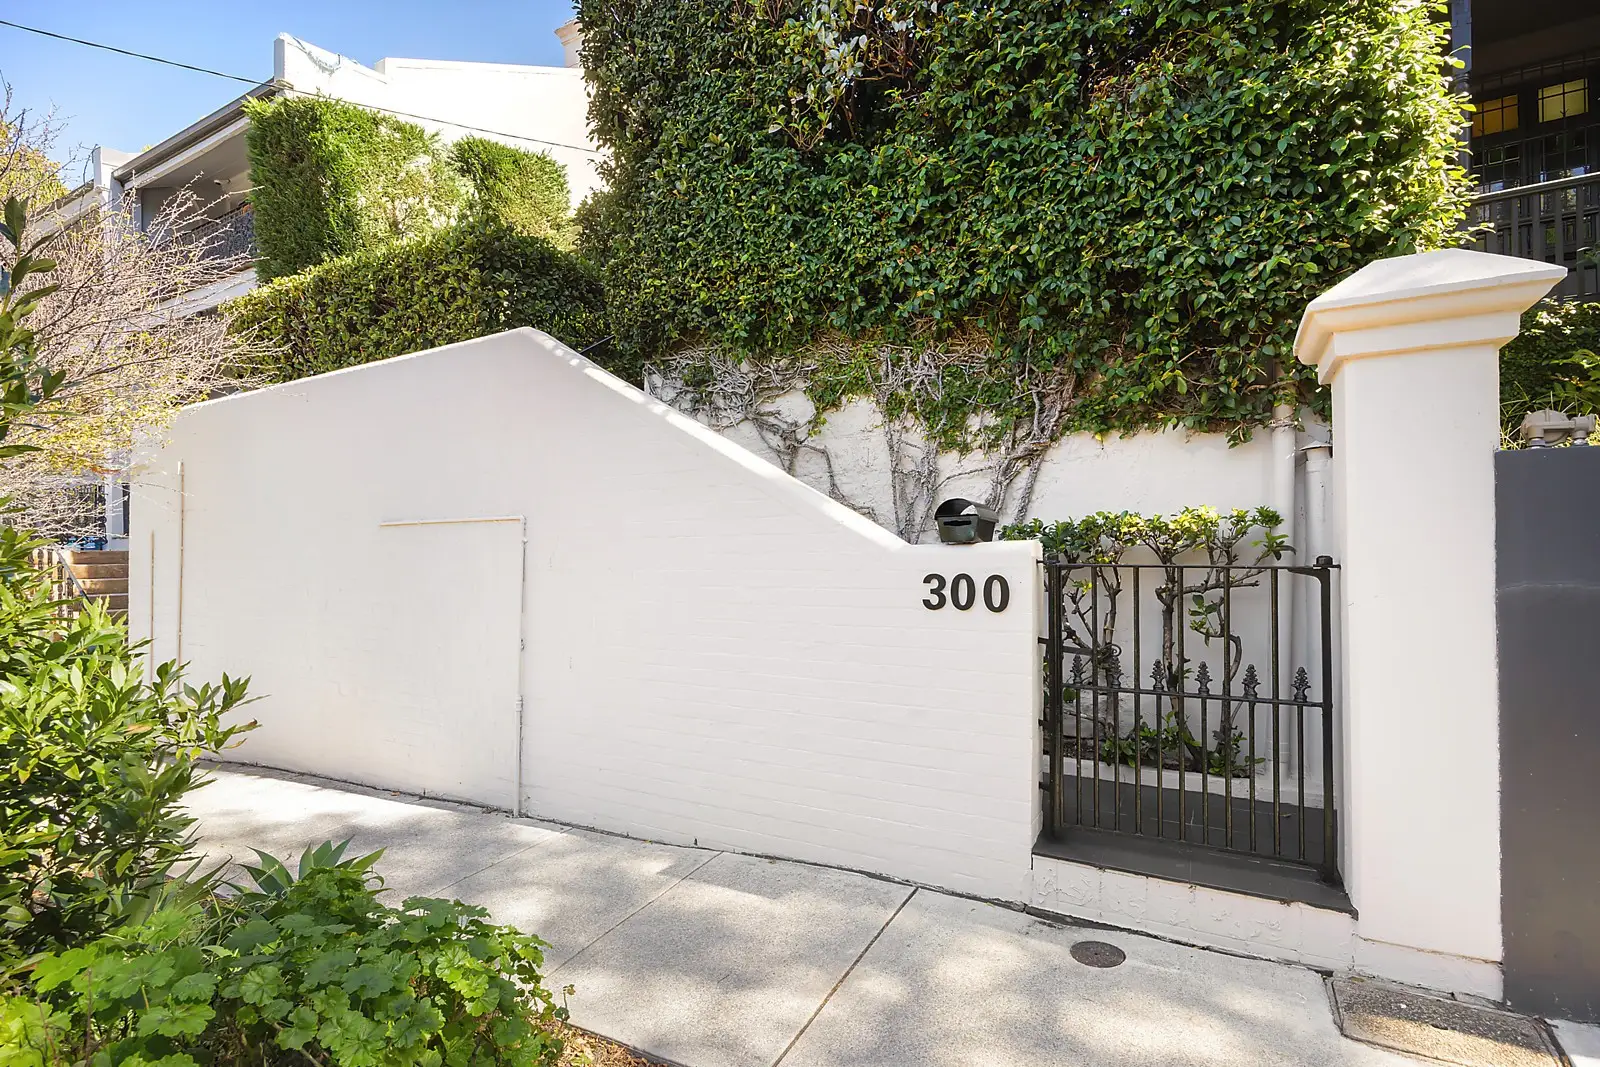 Photo #1: 300 Edgecliff Road, Woollahra - Sold by Sydney Sotheby's International Realty